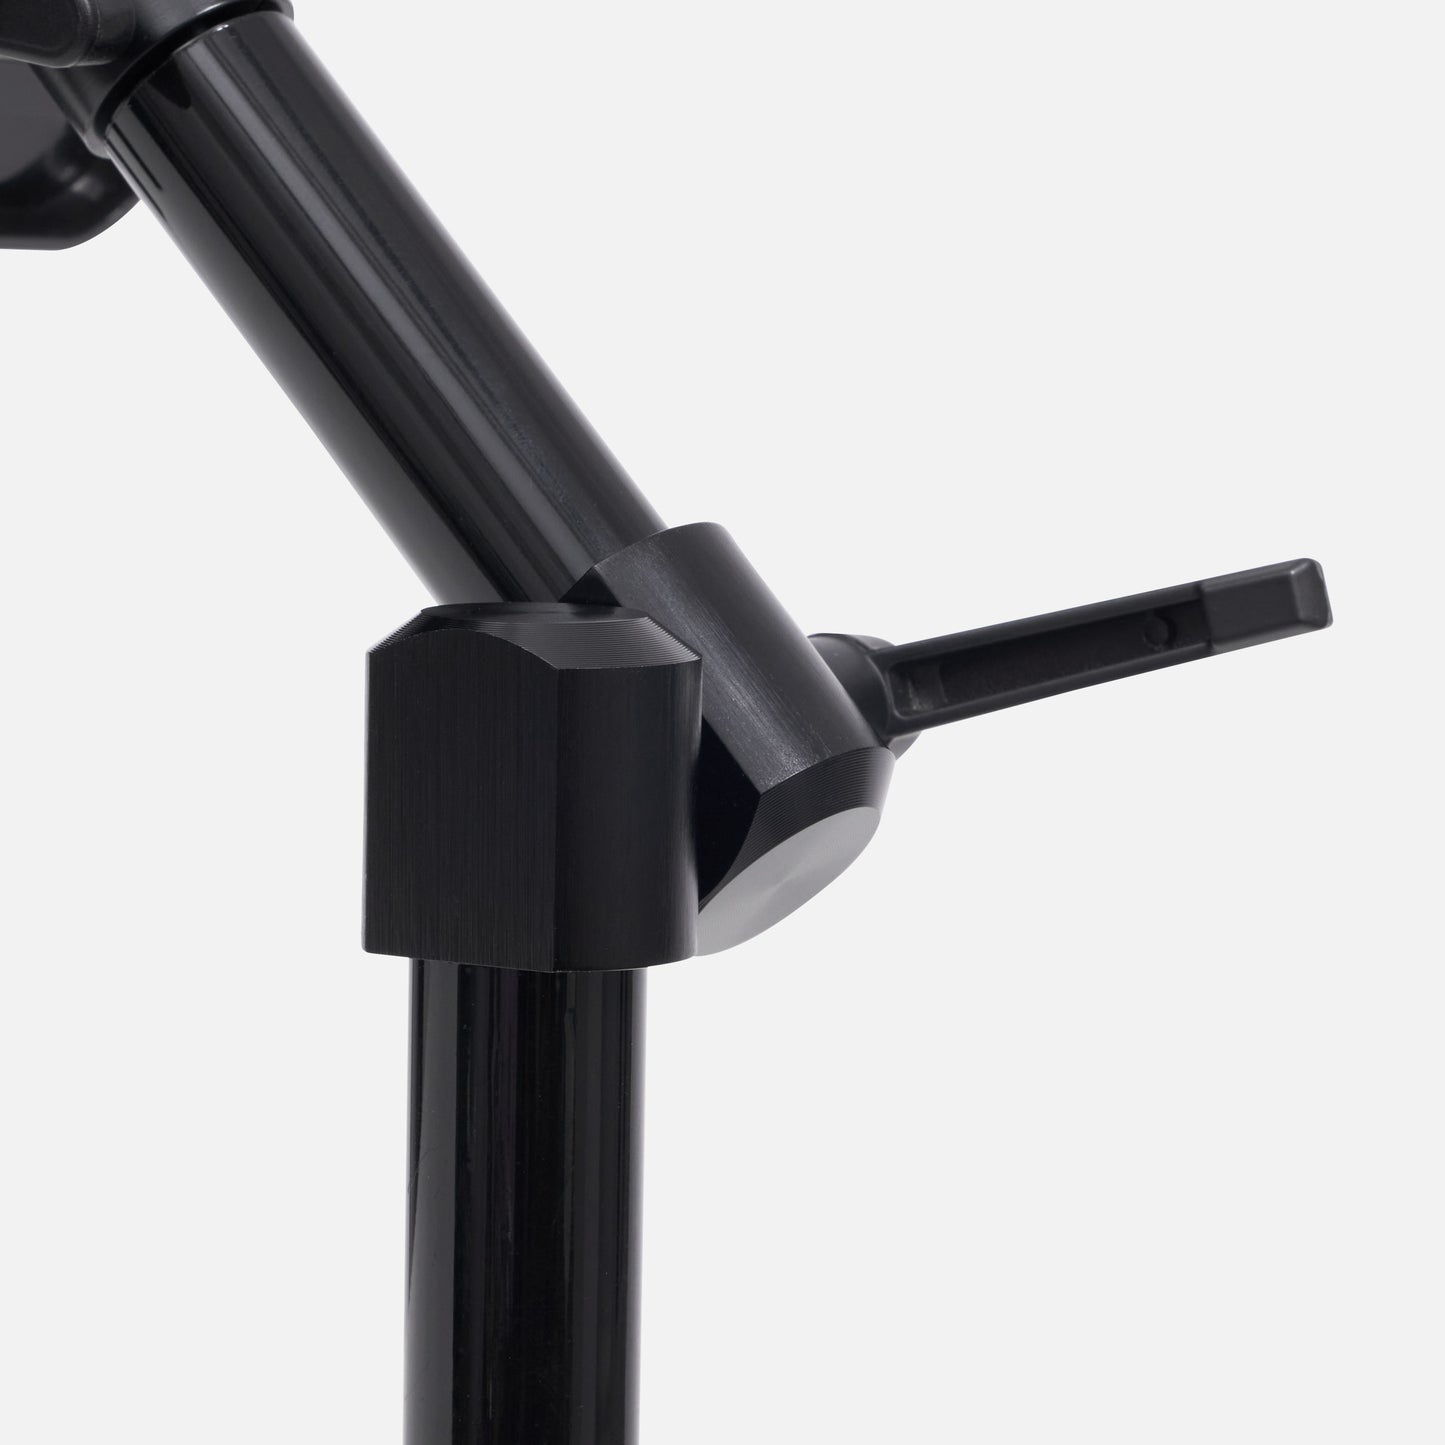 Tablet and iPad Clamp Mount | Grip-CD140 | Utility Line By Bouncepad